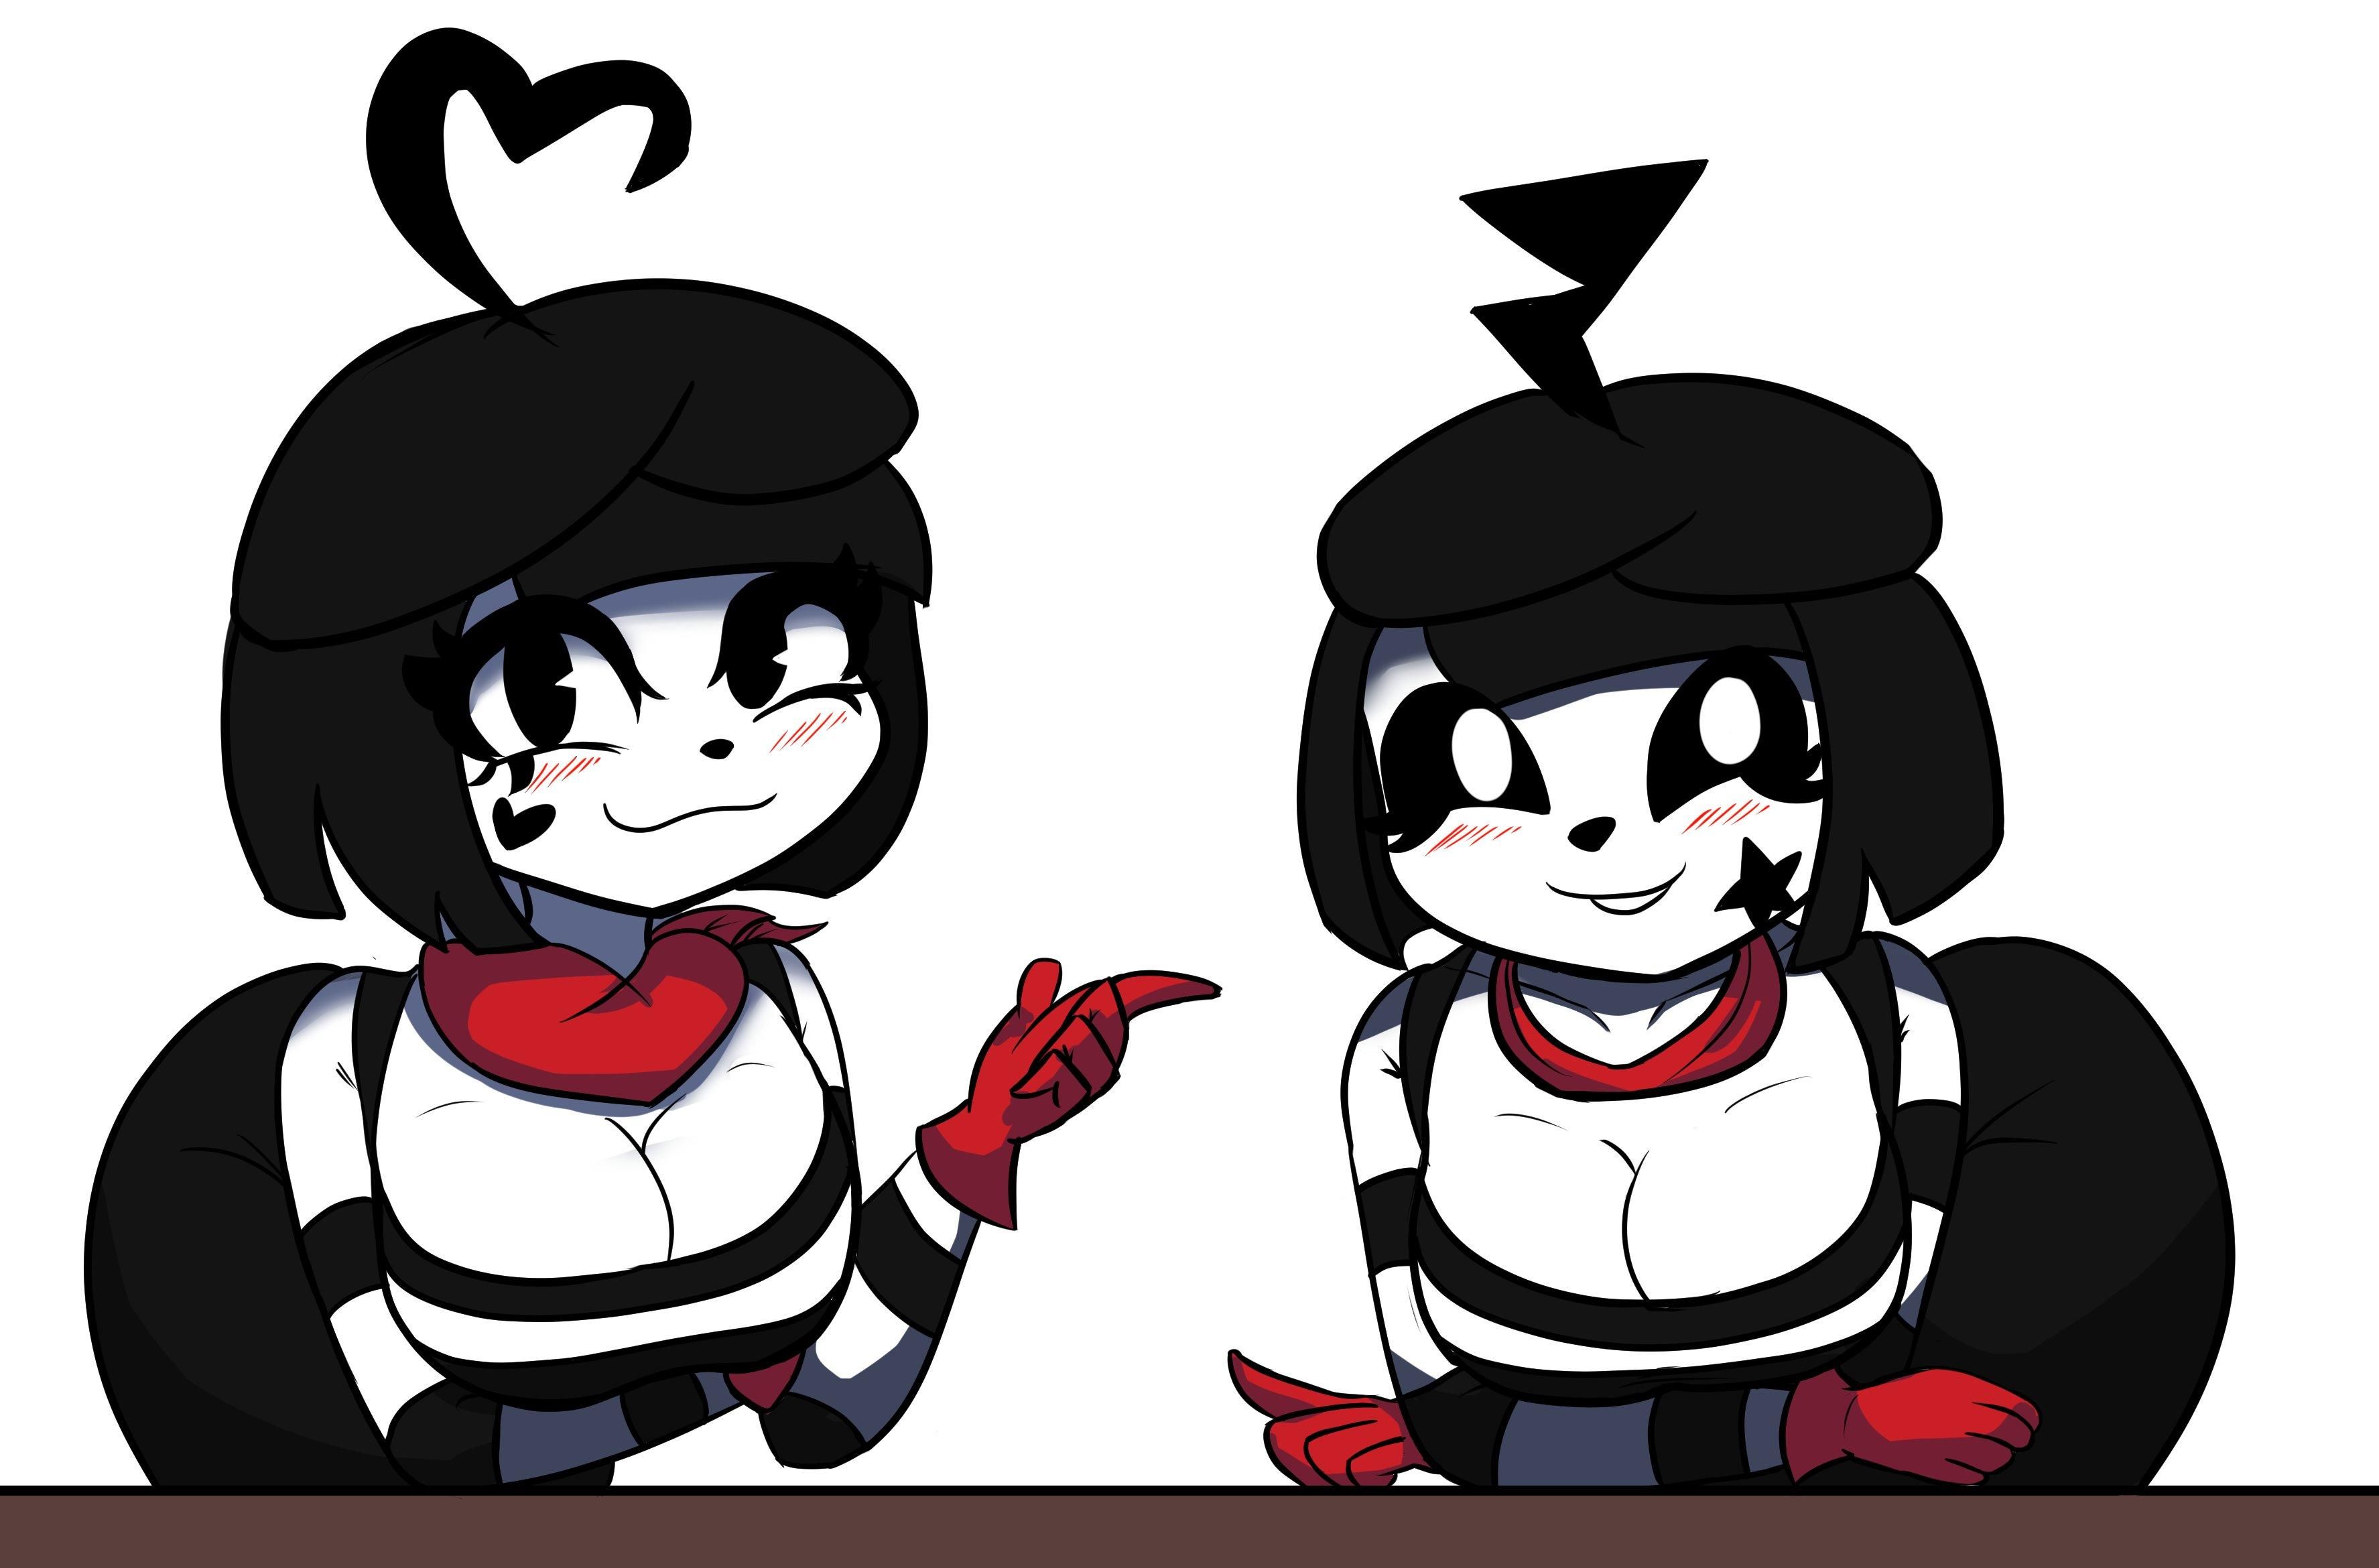 Mime and dash HD wallpapers